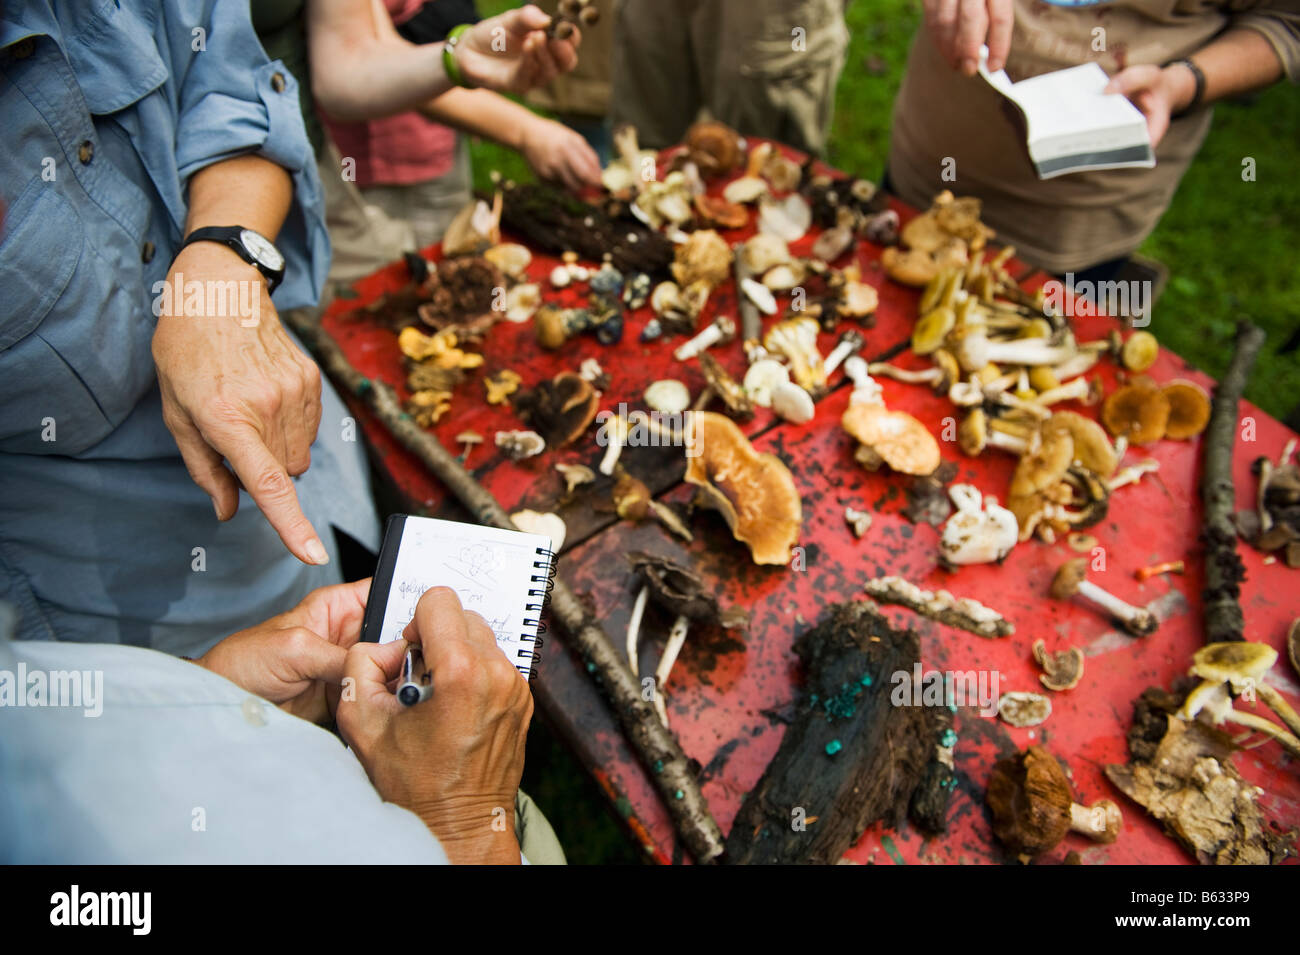 A group of people jotting down notes on the various types of mushrooms found during a mushroom hunt in upstate NY. Stock Photo